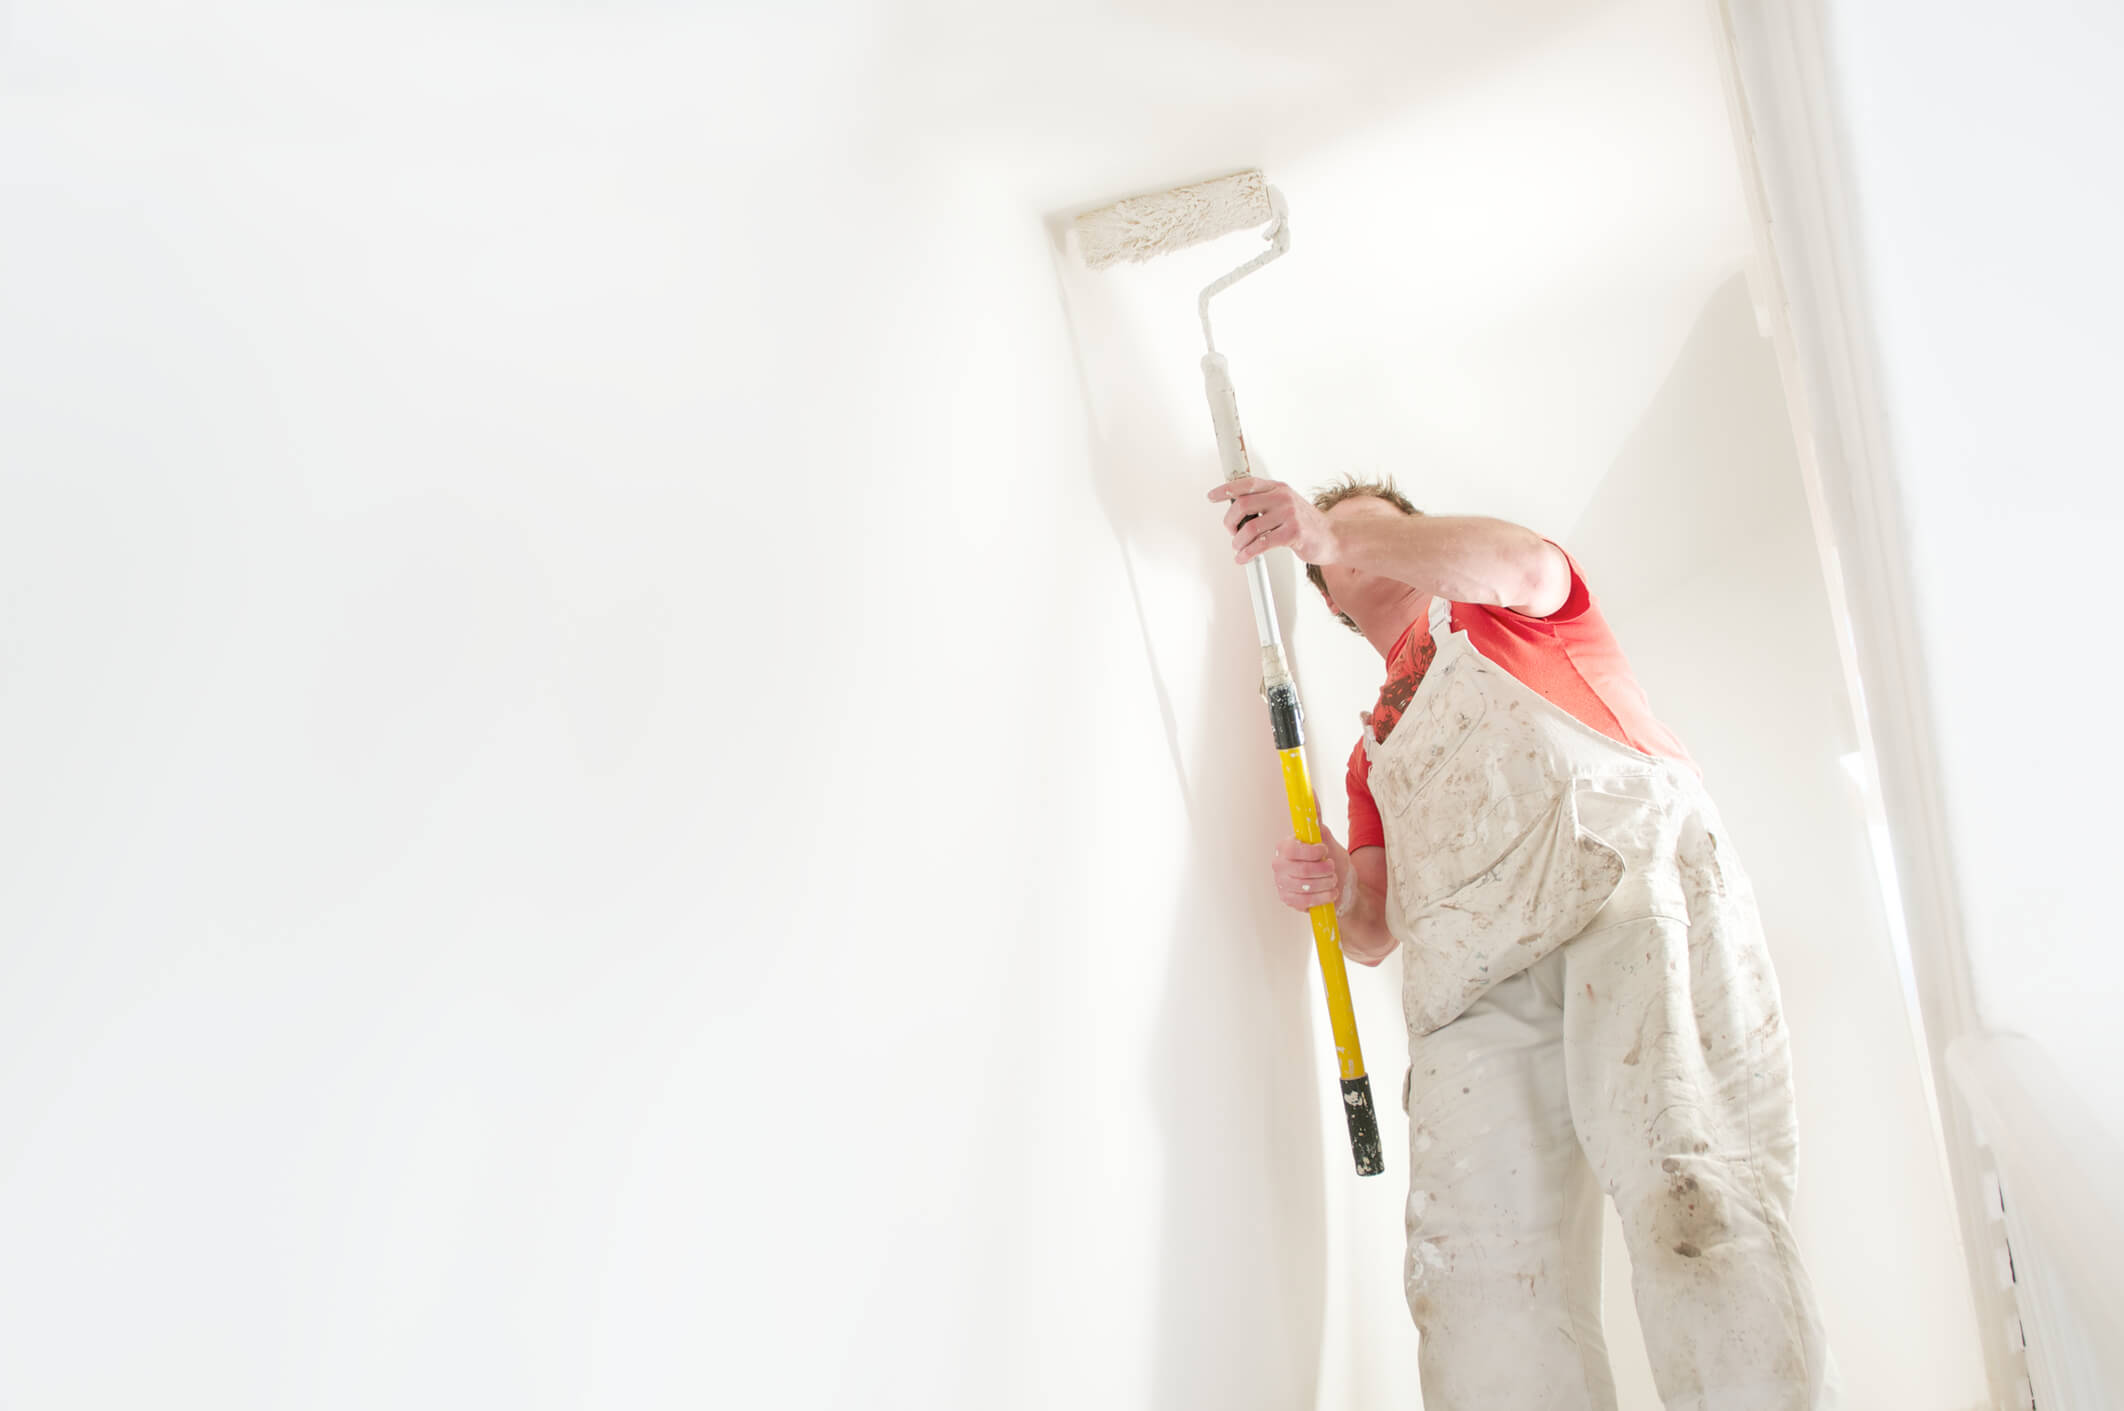 Man painting the inside of a commercial building with a roller brush